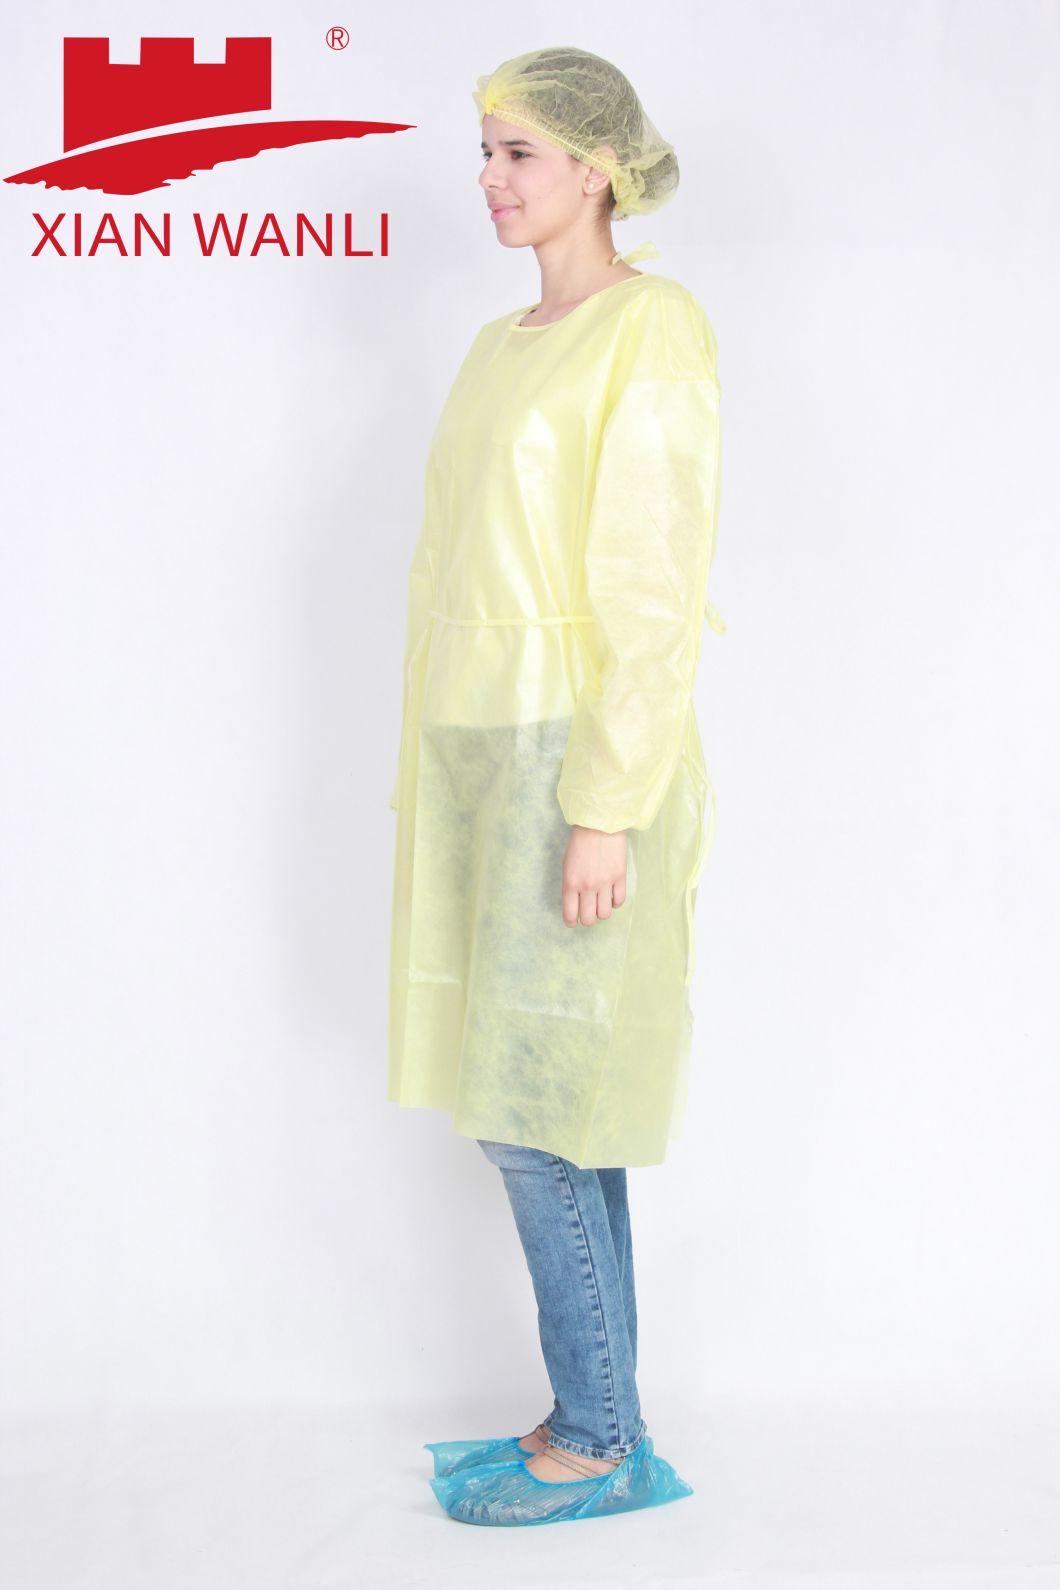 Disposable Half Laminated Gown Waterproof Coat in Hospital